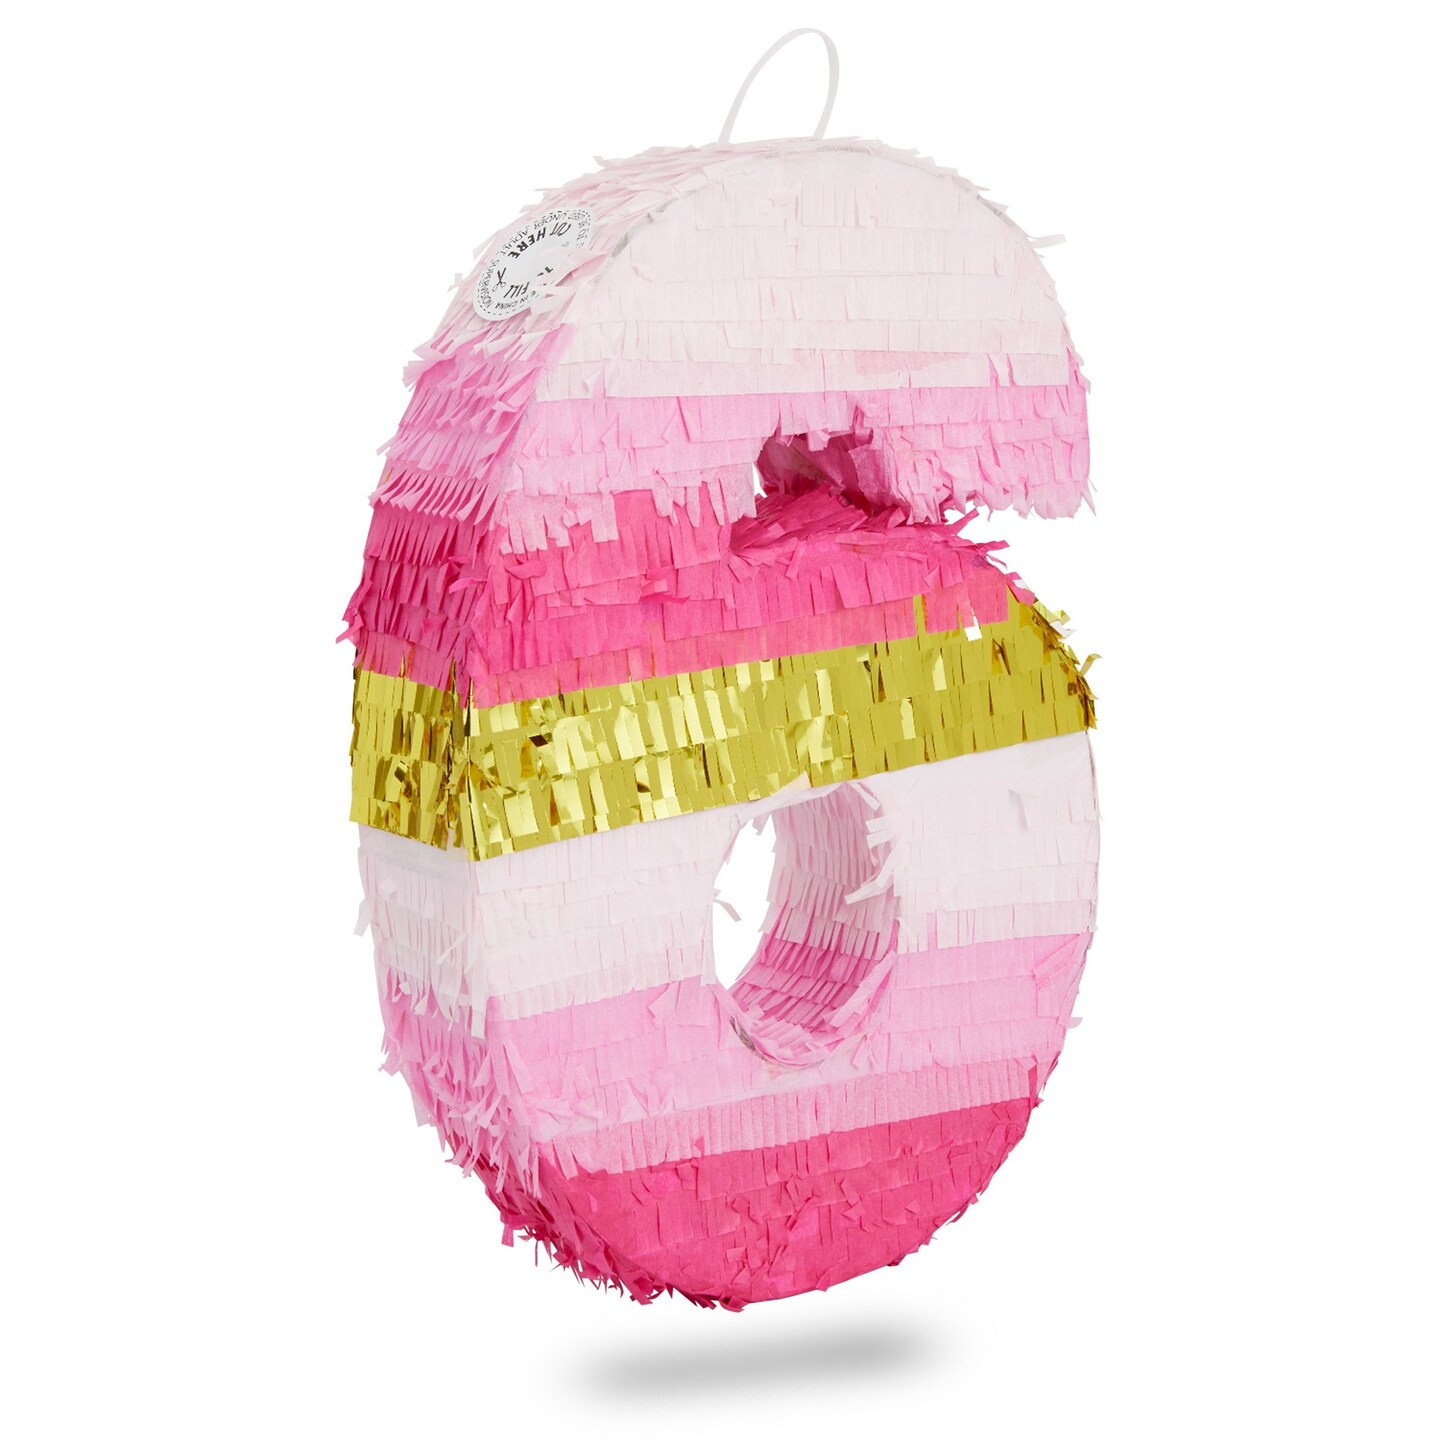 Small Pink and Gold Foil Number 6 Pinata for Kids 6th Birthday Party Decorations (16.5 x 11 Inches)